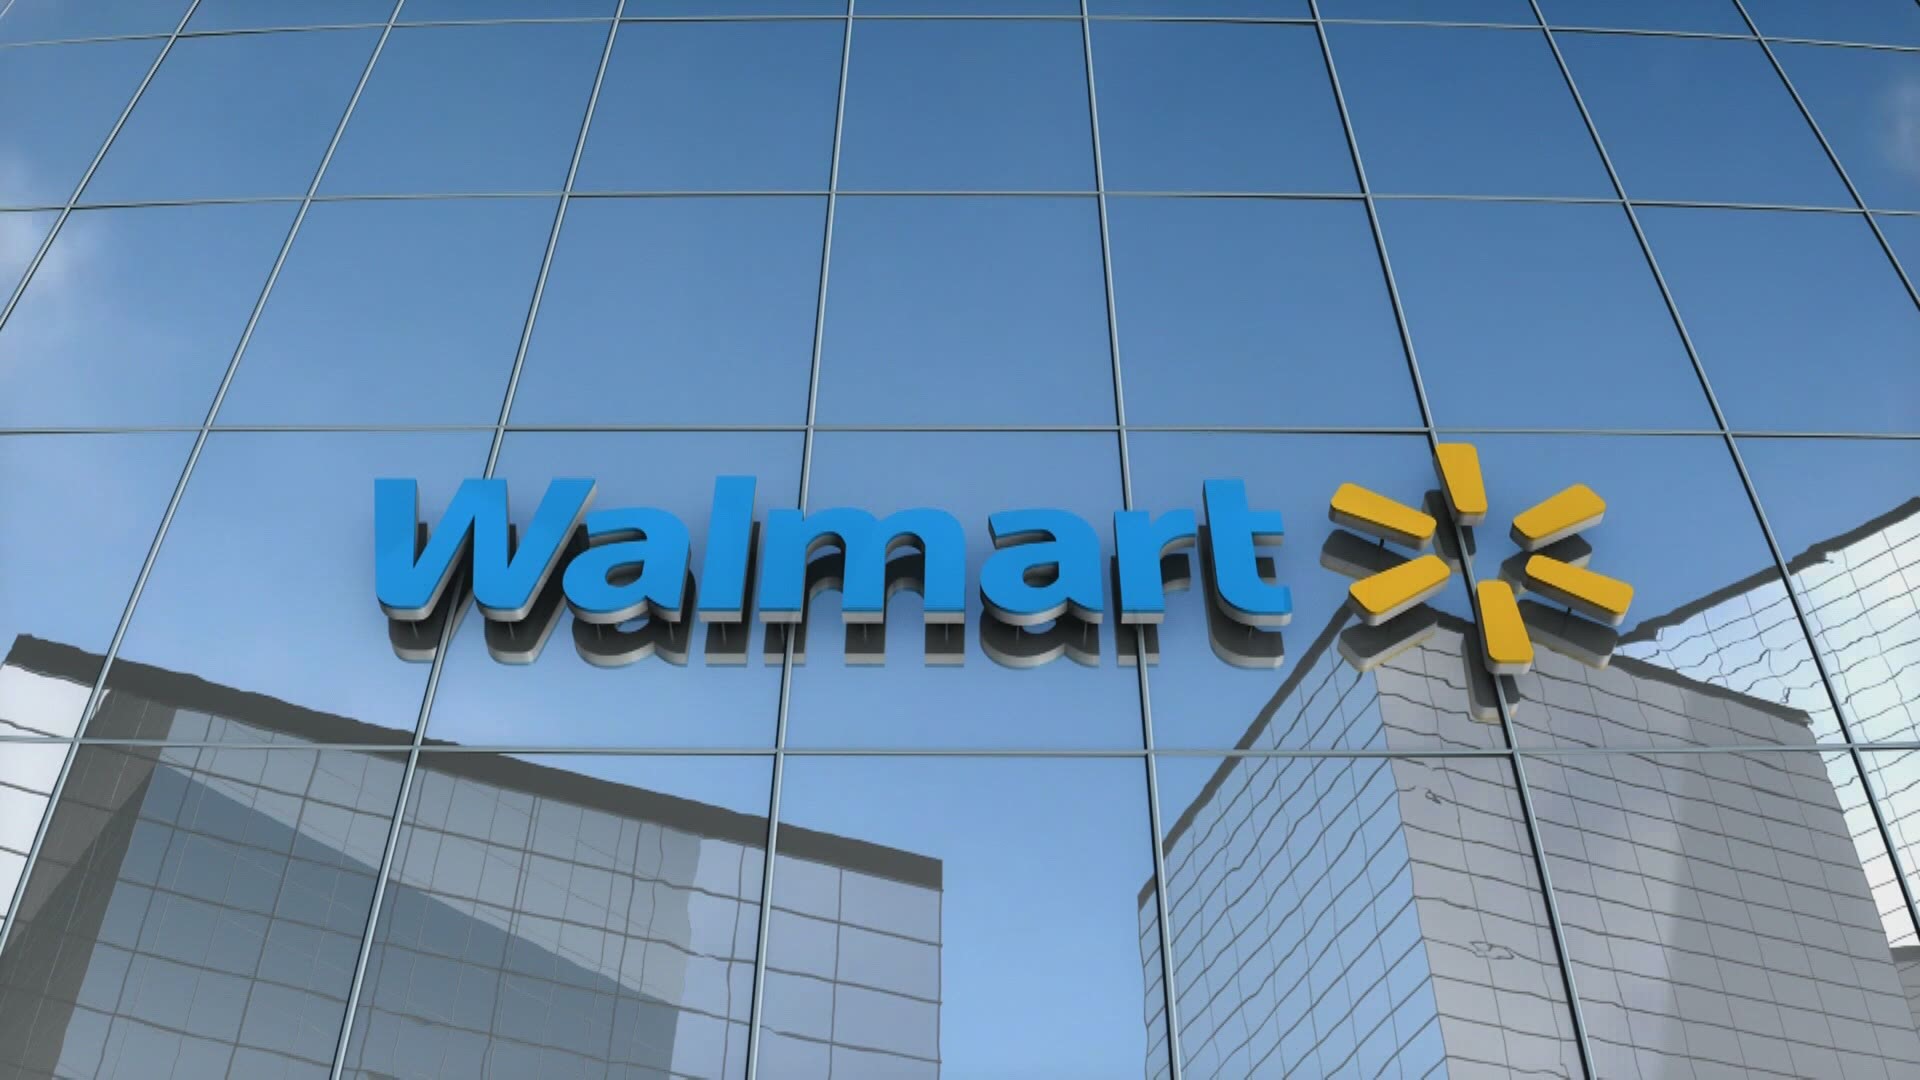 Several people have been charged in a far-reaching scam involving fraudulent electronics returns at Walmart stores across the U.S.